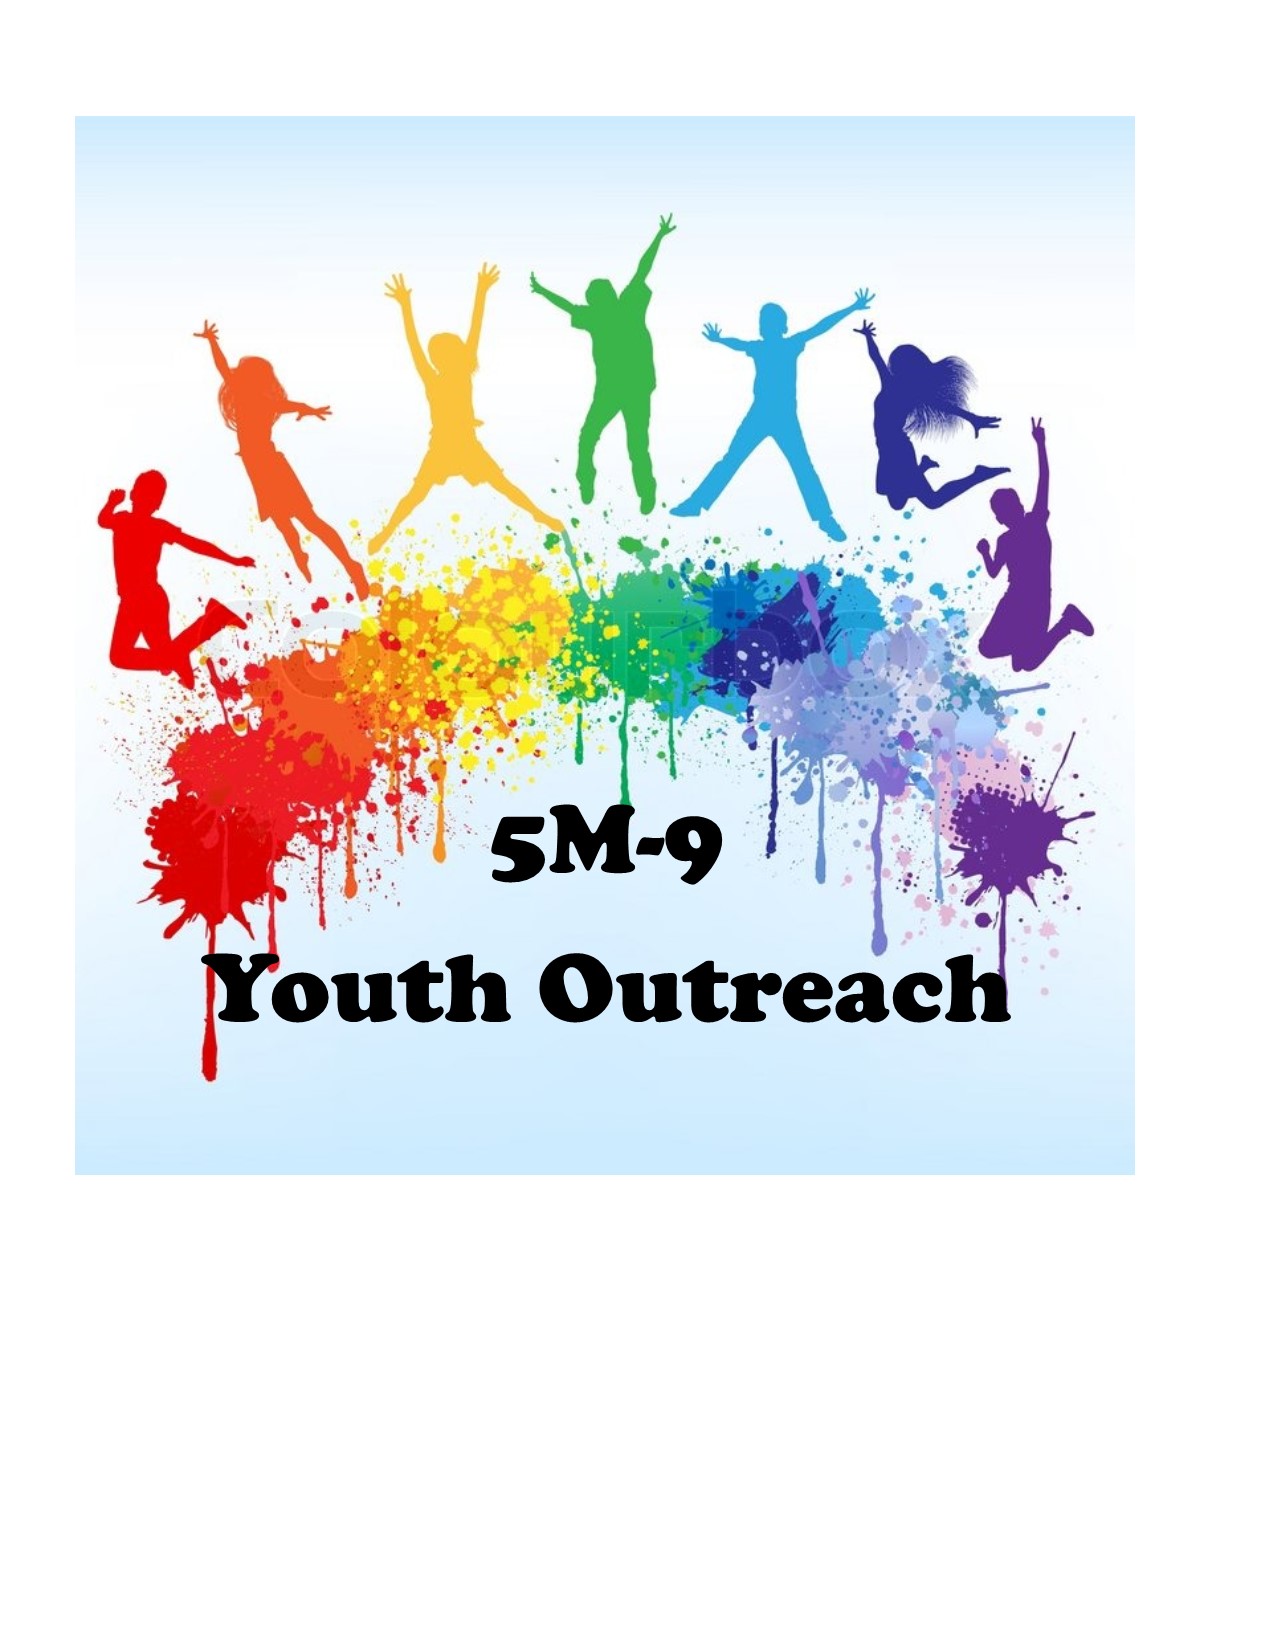 Please click here for information on the 5M-9 Youth Outreach Scholarship